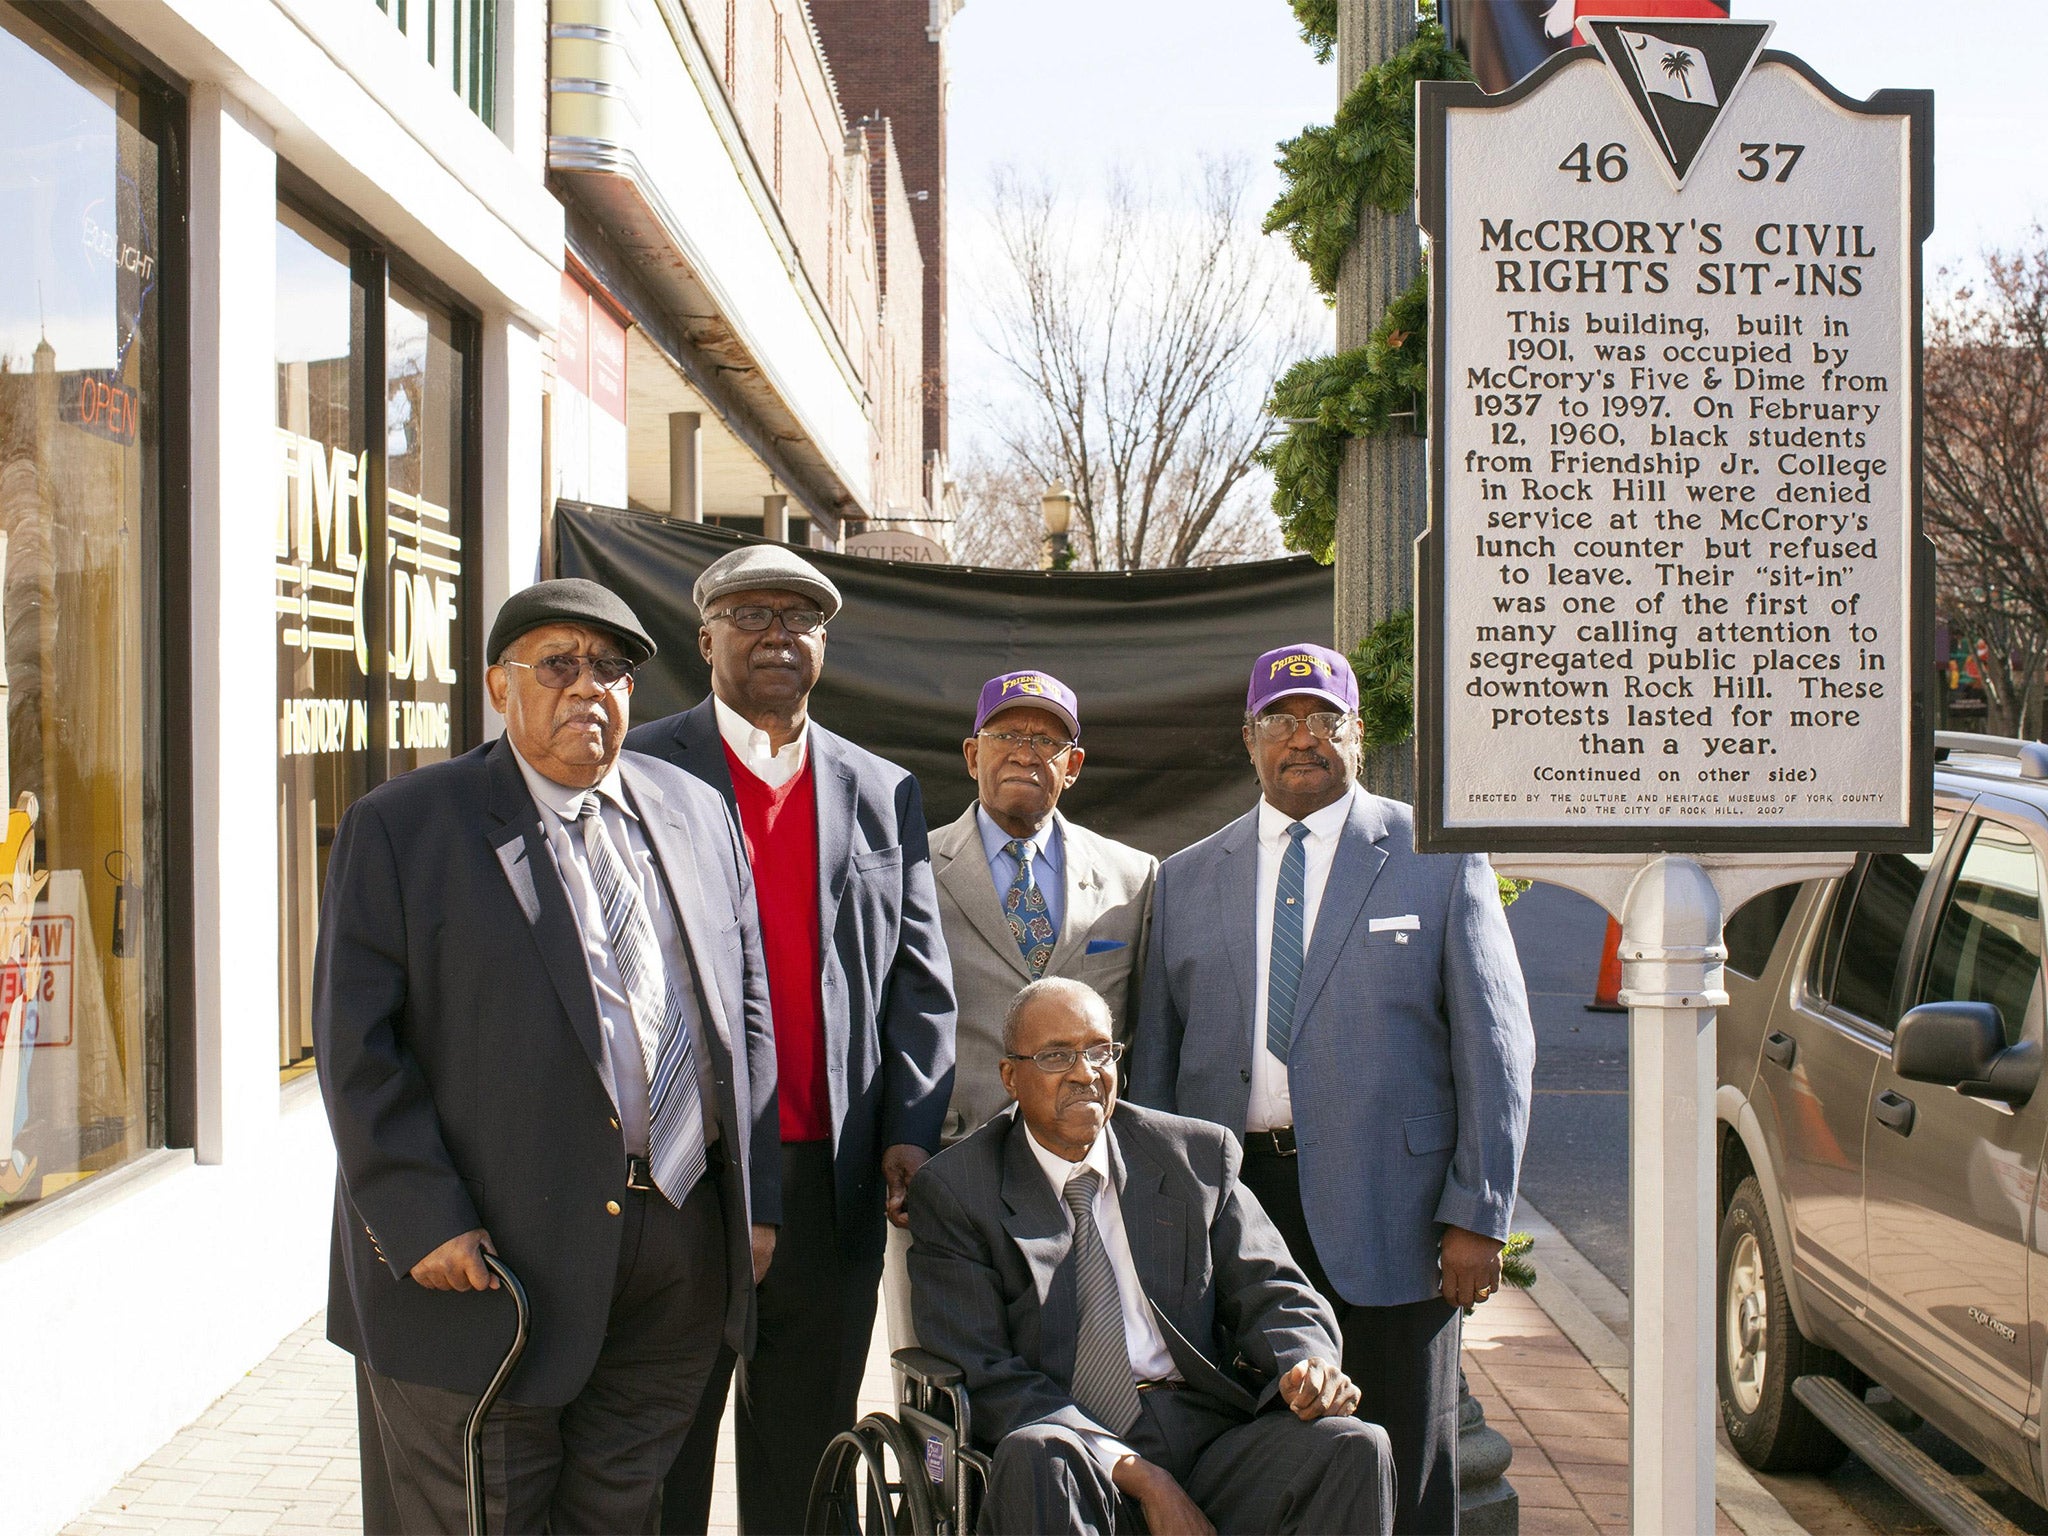 Friendship Nine members (from left to right): Clarence Graham, David Williamson Jr., Willie Thomas Massey, James F. Wells and Willie E. McCleod stand in front of a historical commemorative marker outside the Five & Dine diner in Rock Hill, South Carolina